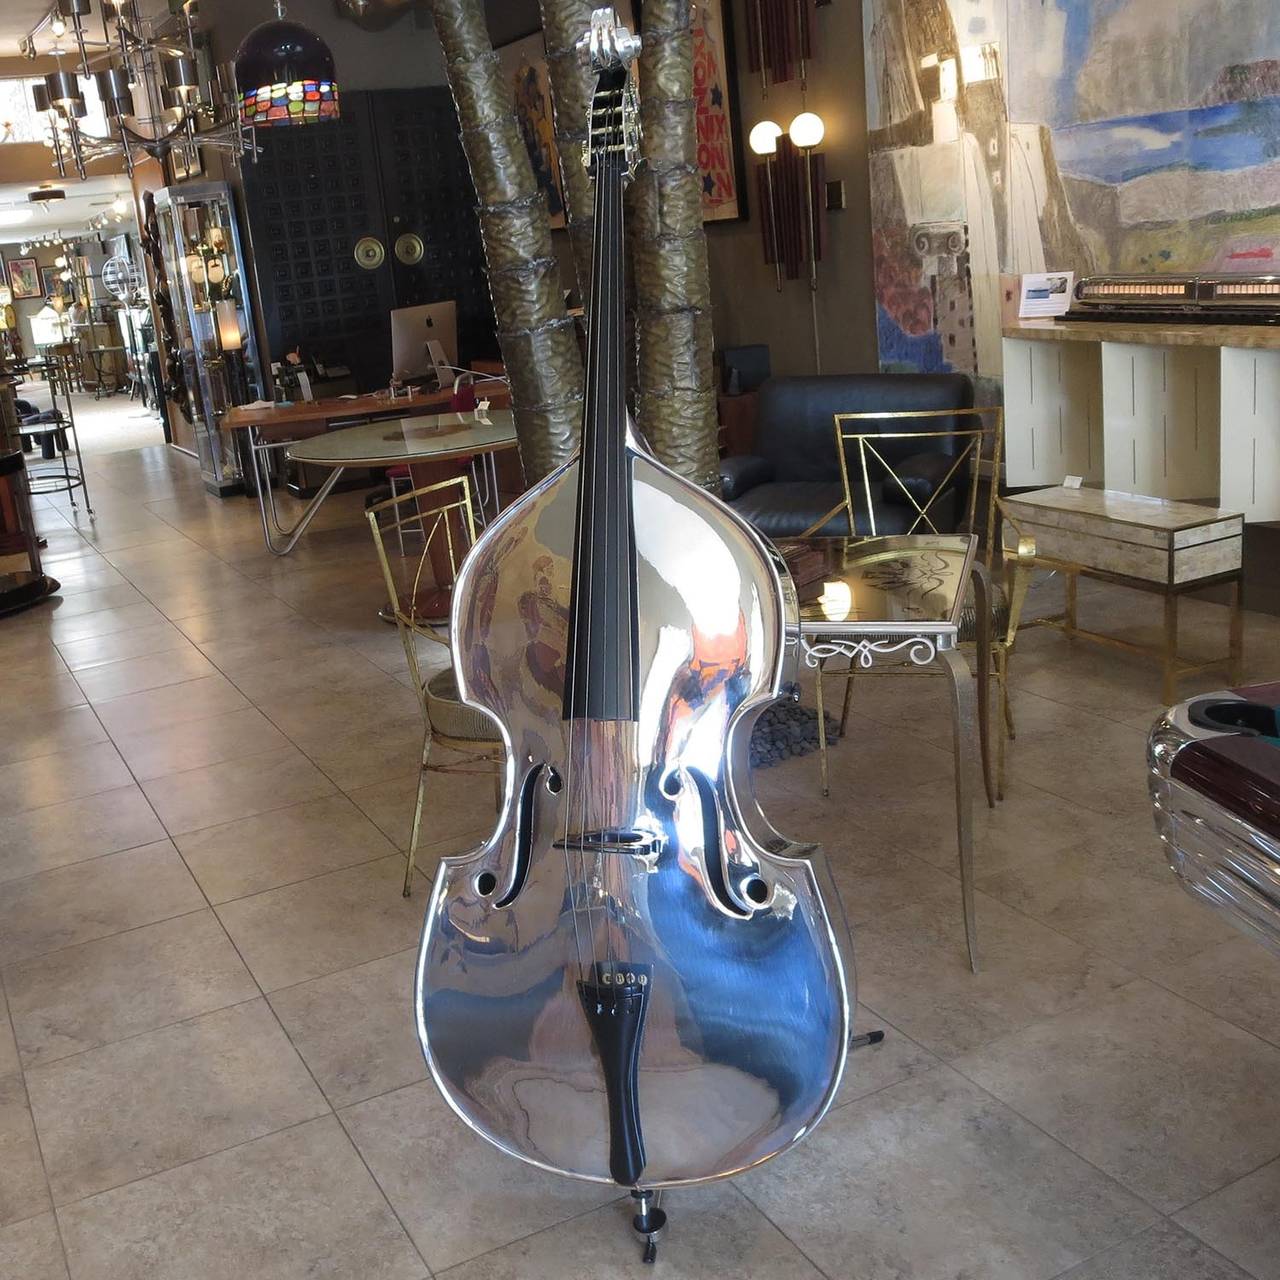 This unbelievable instrument was designed (along with an aluminum violin) by John Burdick, an engineer with Alcoa Aluminum. They were created for use on cruise ships and in limited numbers for student orchestras. Most of the examples found have a